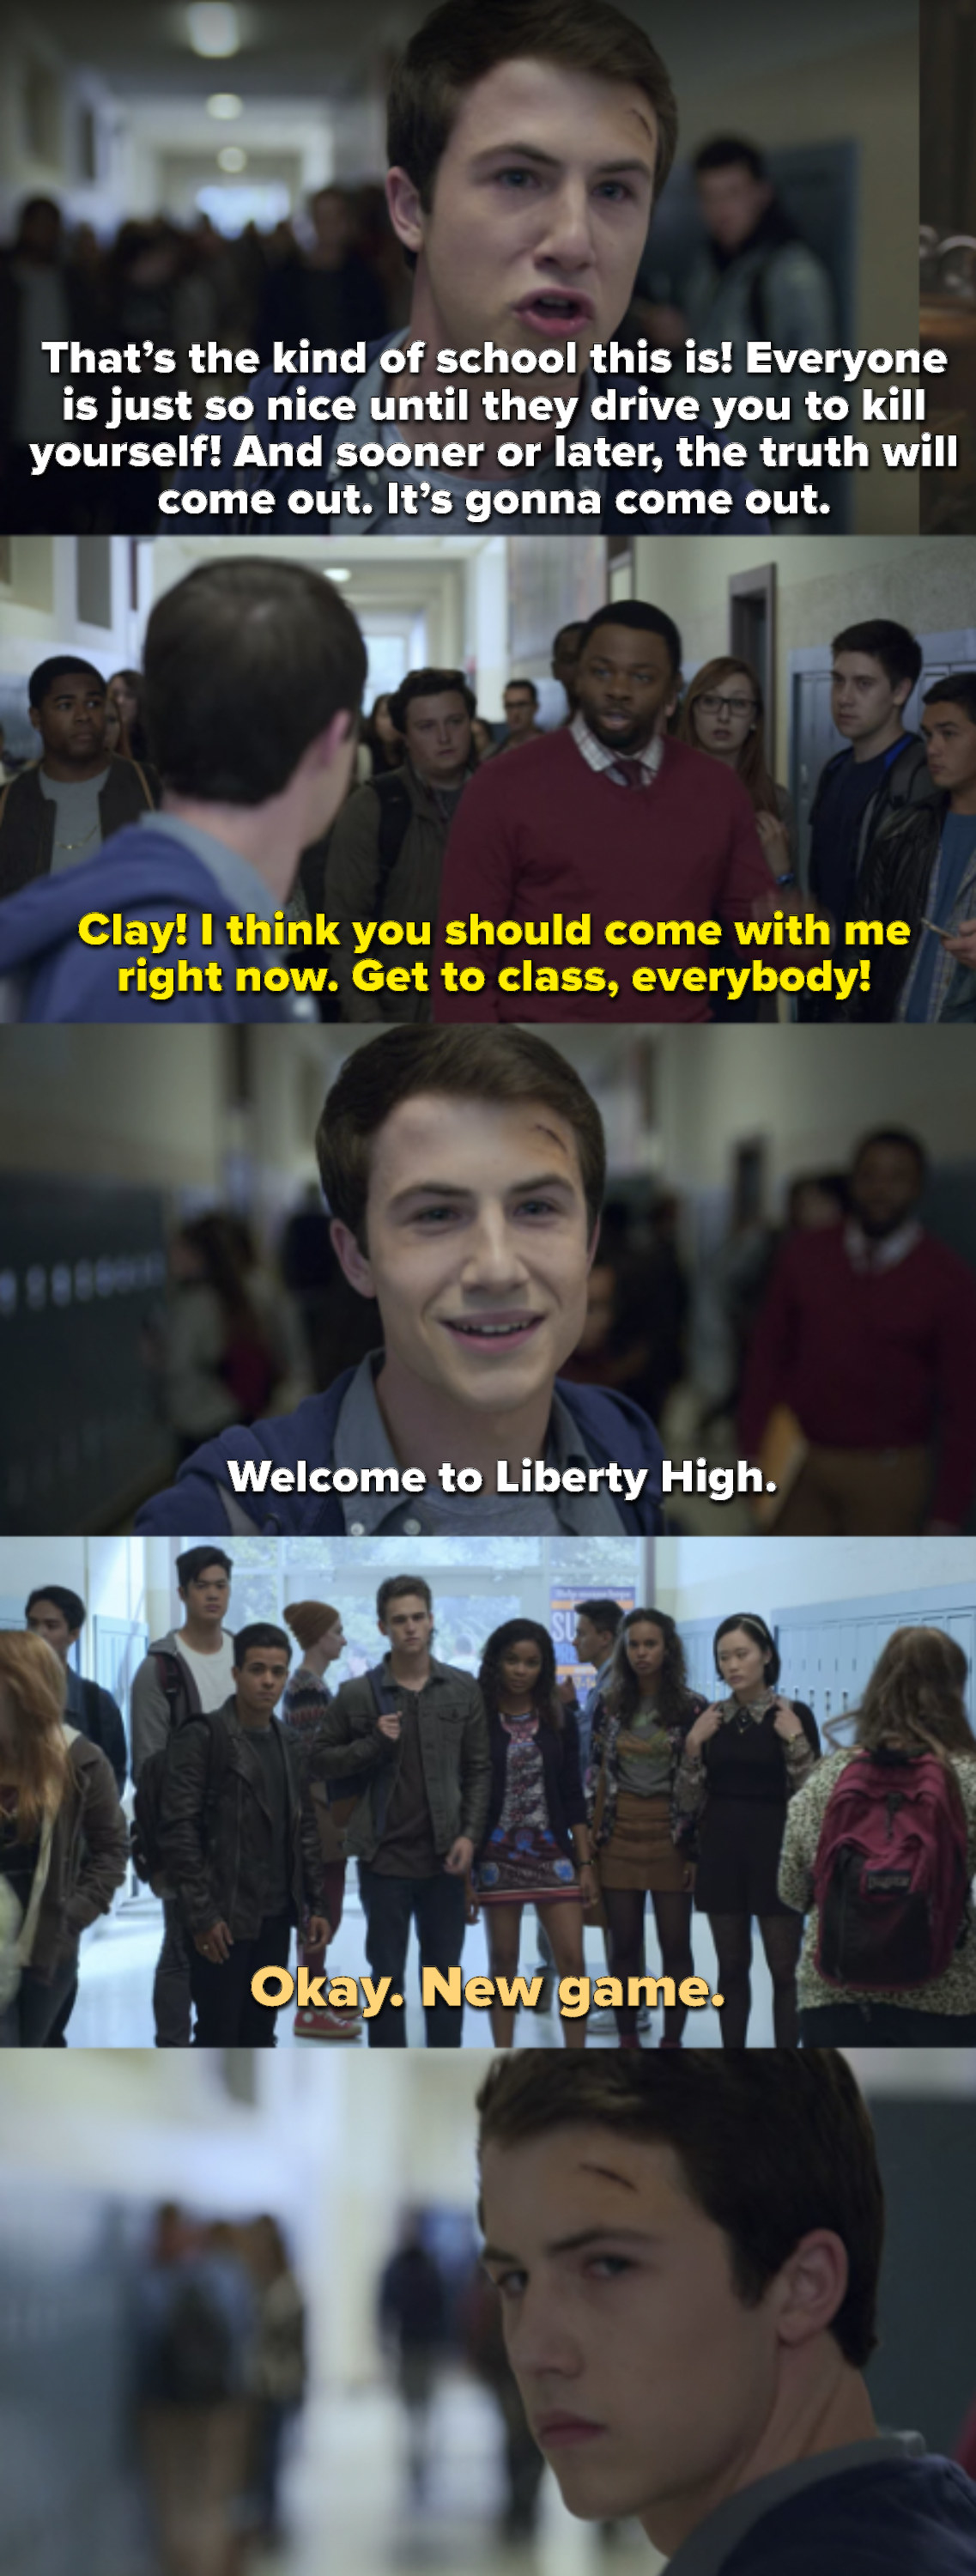 Clay saying everyone at school is so nice until they drive you to kill yourself and that the truth will come out — Mr. Porter asks Clay to come with him and Clay says &quot;Welcome to Liberty High,&quot; then Justin says &quot;New game&quot; as Clay walks away 